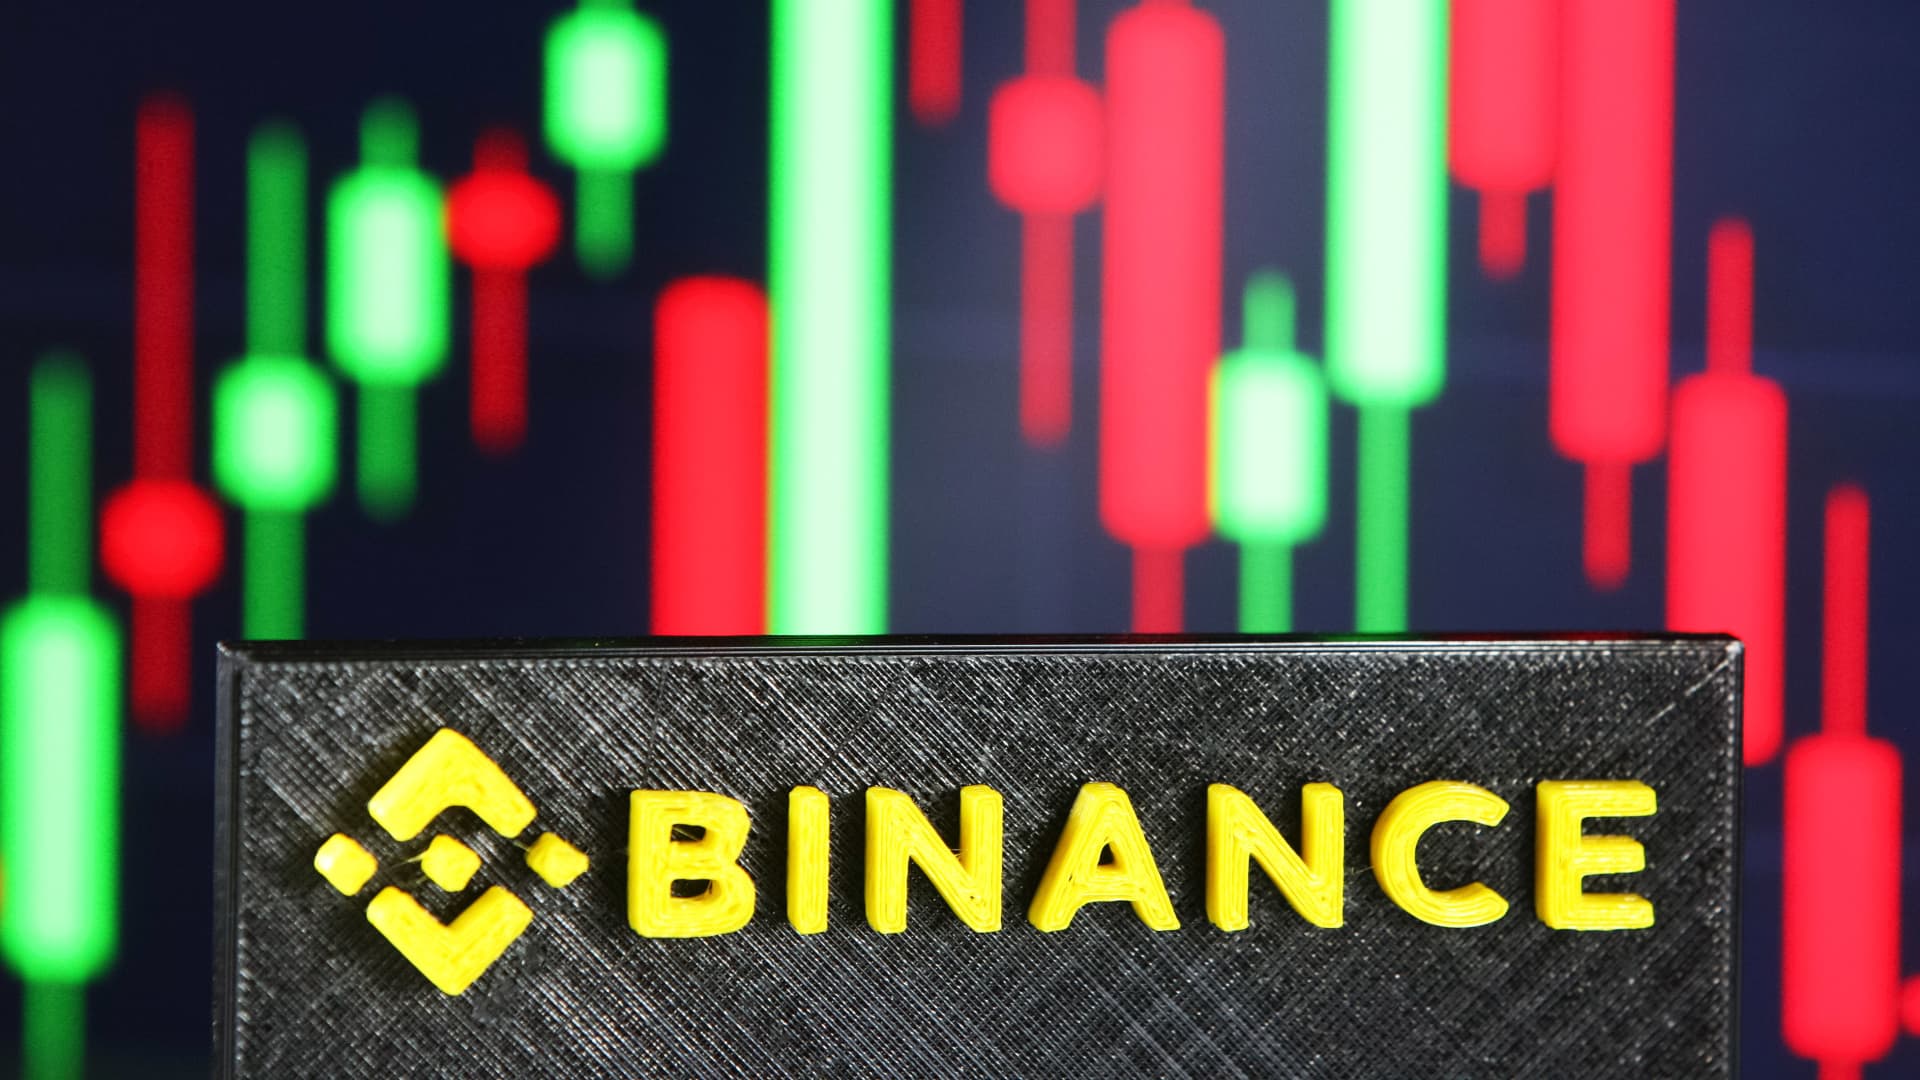 Binance was the ultimate destination for millions of funds from Bitzlato